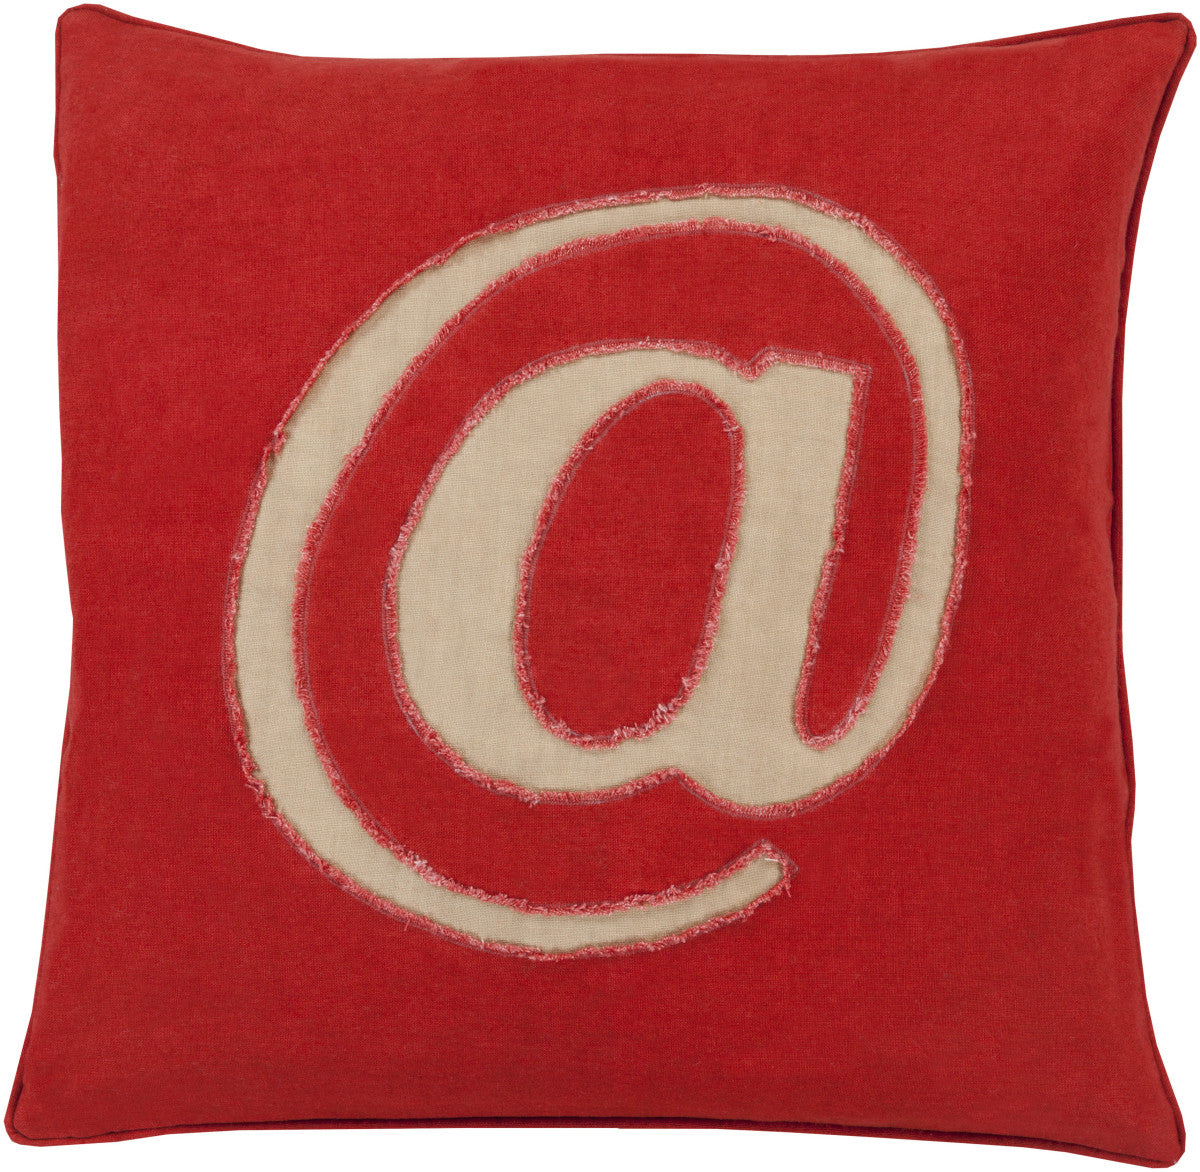 Surya Linen Text Where it's at LX-002 Pillow